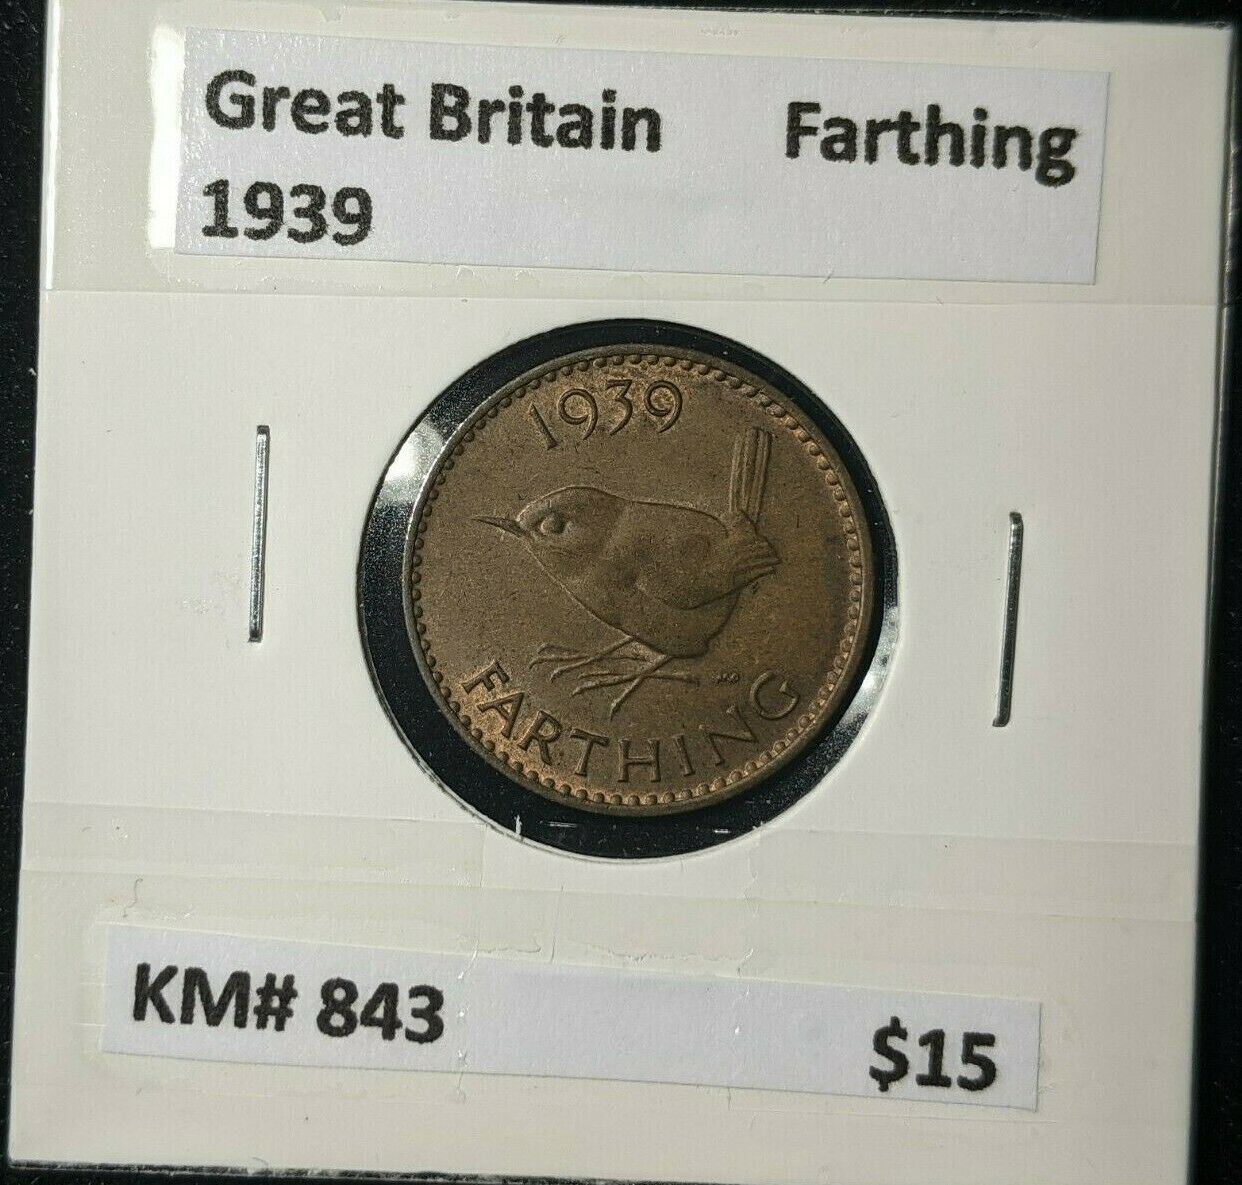 Great Britain 1939 1/4d Farthing KM# 843 #102